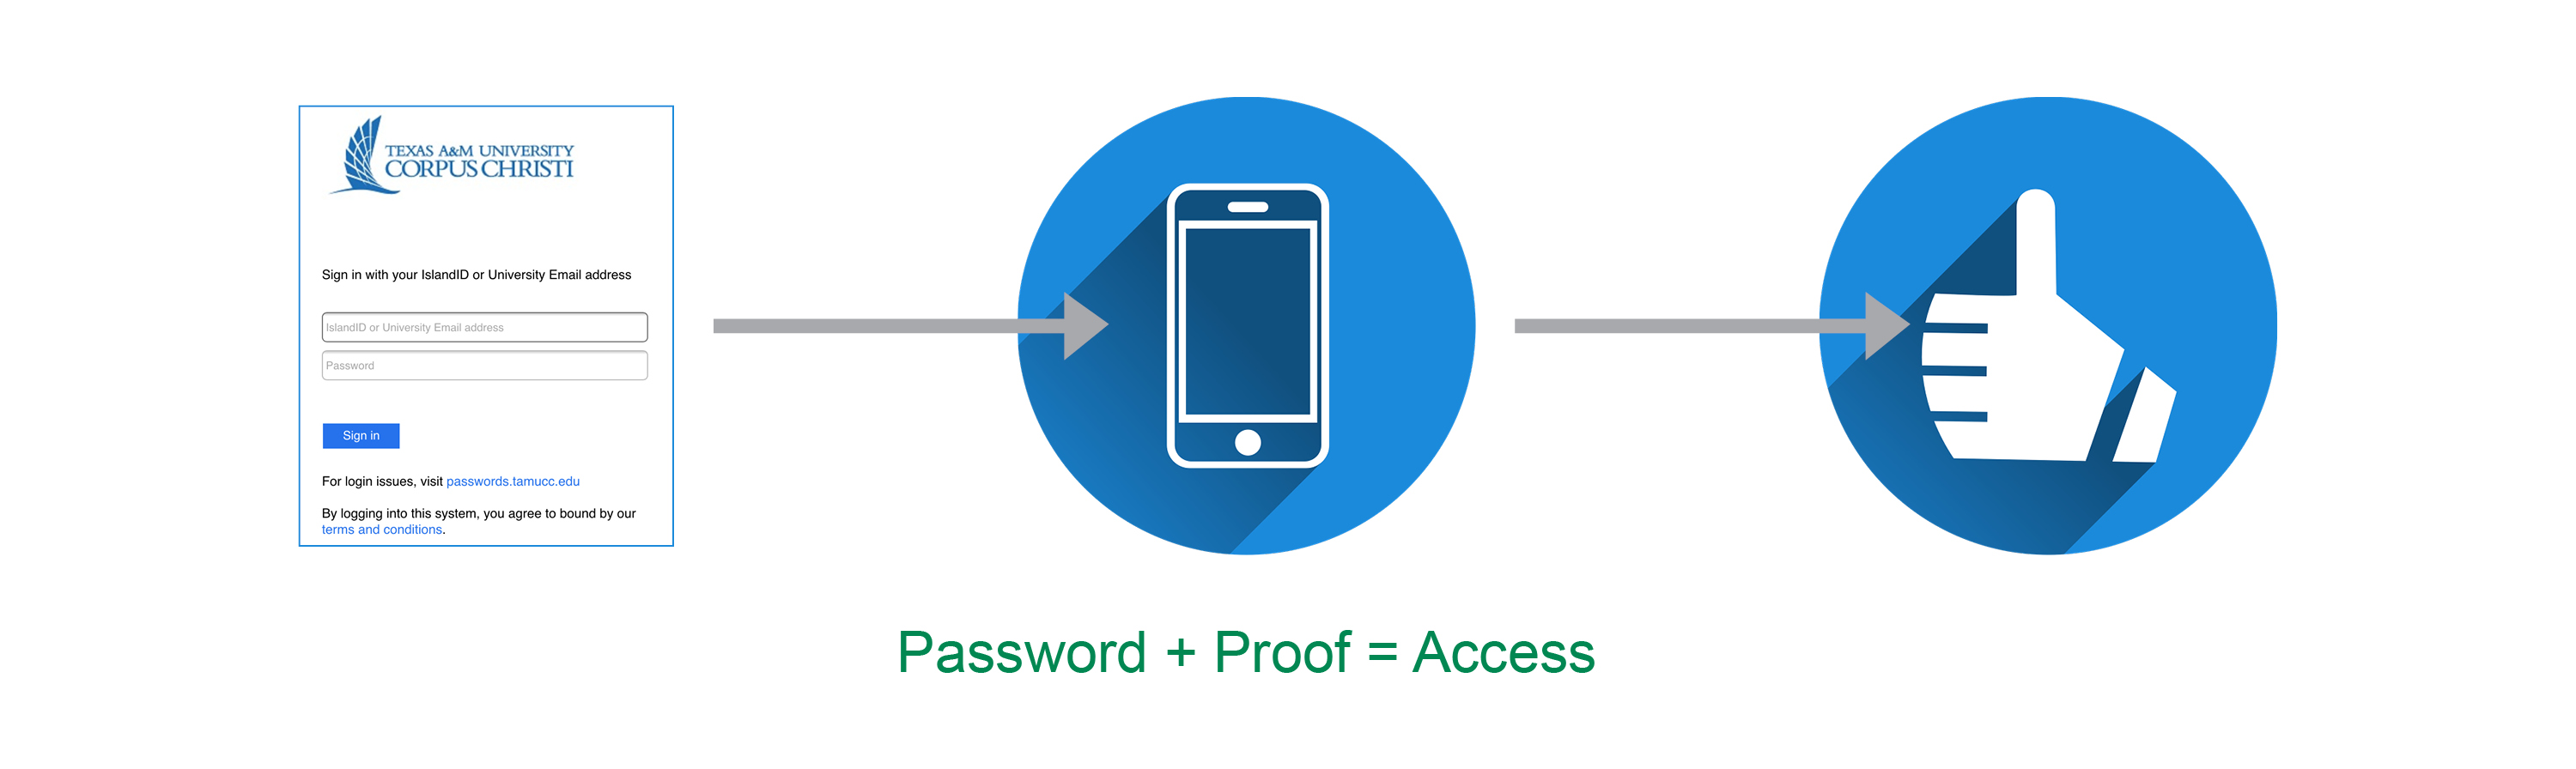 Duo Logging in approval: Password + Proof = Access